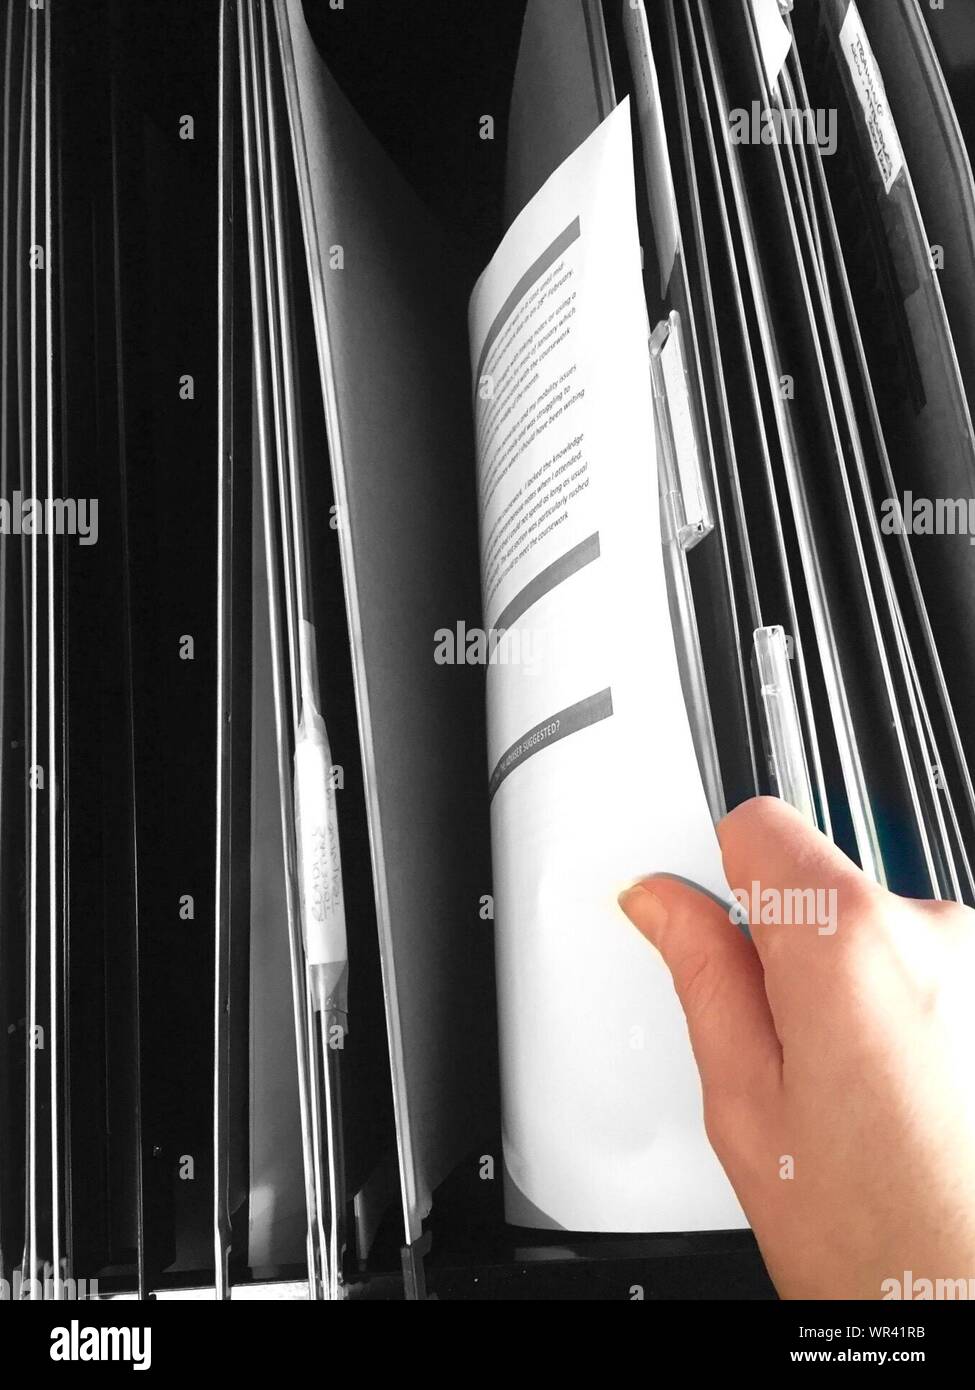 Cropped Image Of Hand Holding Documents In Filing Cabinet At Office Stock Photo